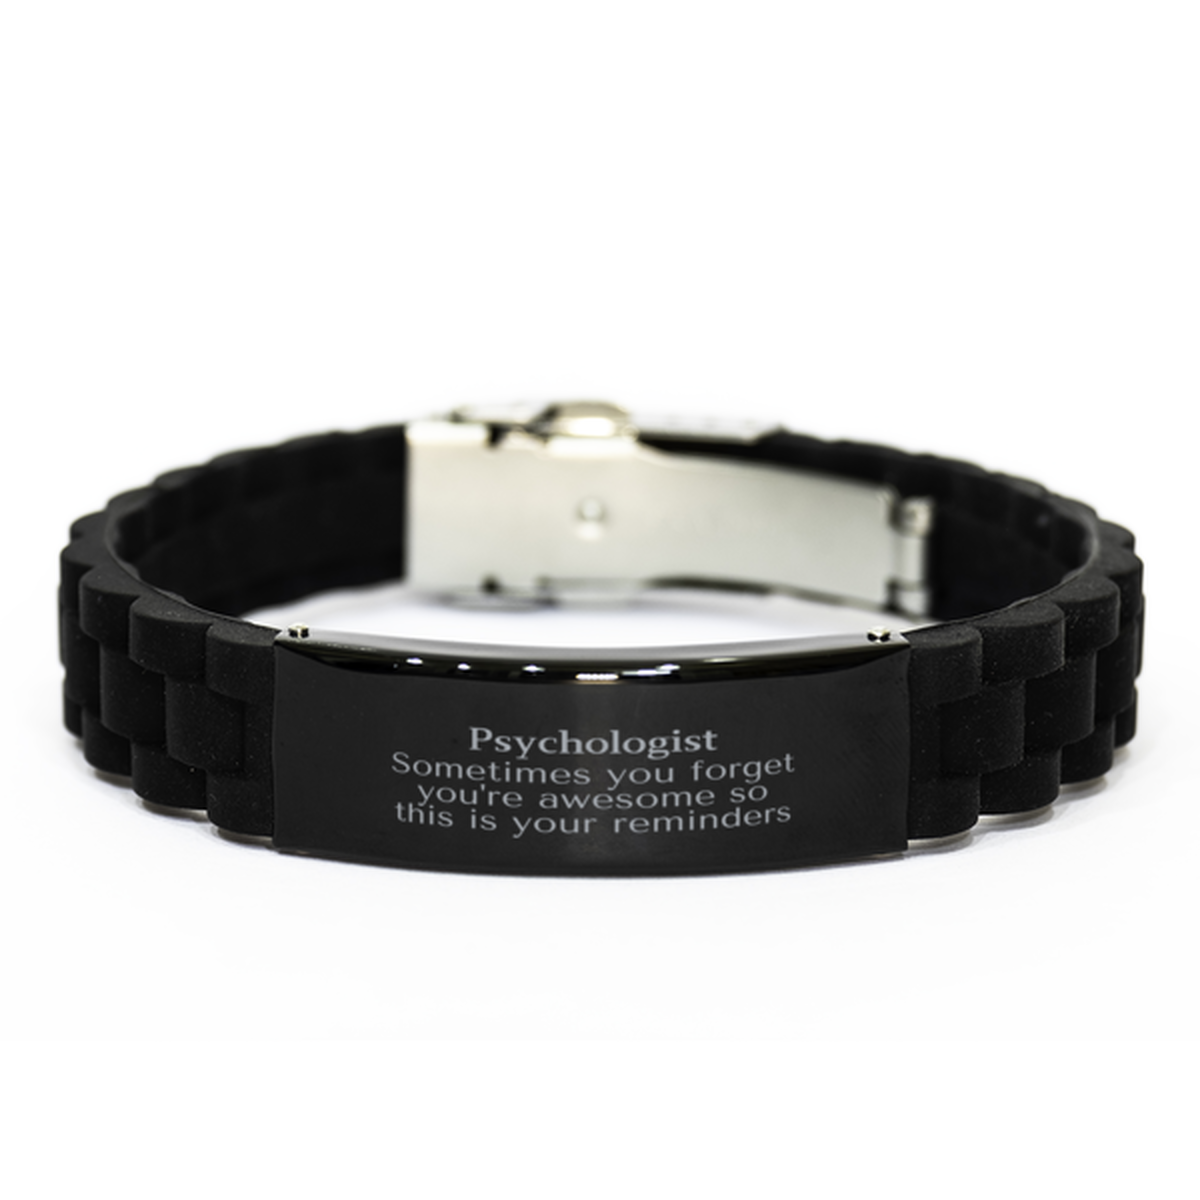 Sentimental Psychologist Black Glidelock Clasp Bracelet, Psychologist Sometimes you forget you're awesome so this is your reminders, Graduation Christmas Birthday Gifts for Psychologist, Men, Women, Coworkers